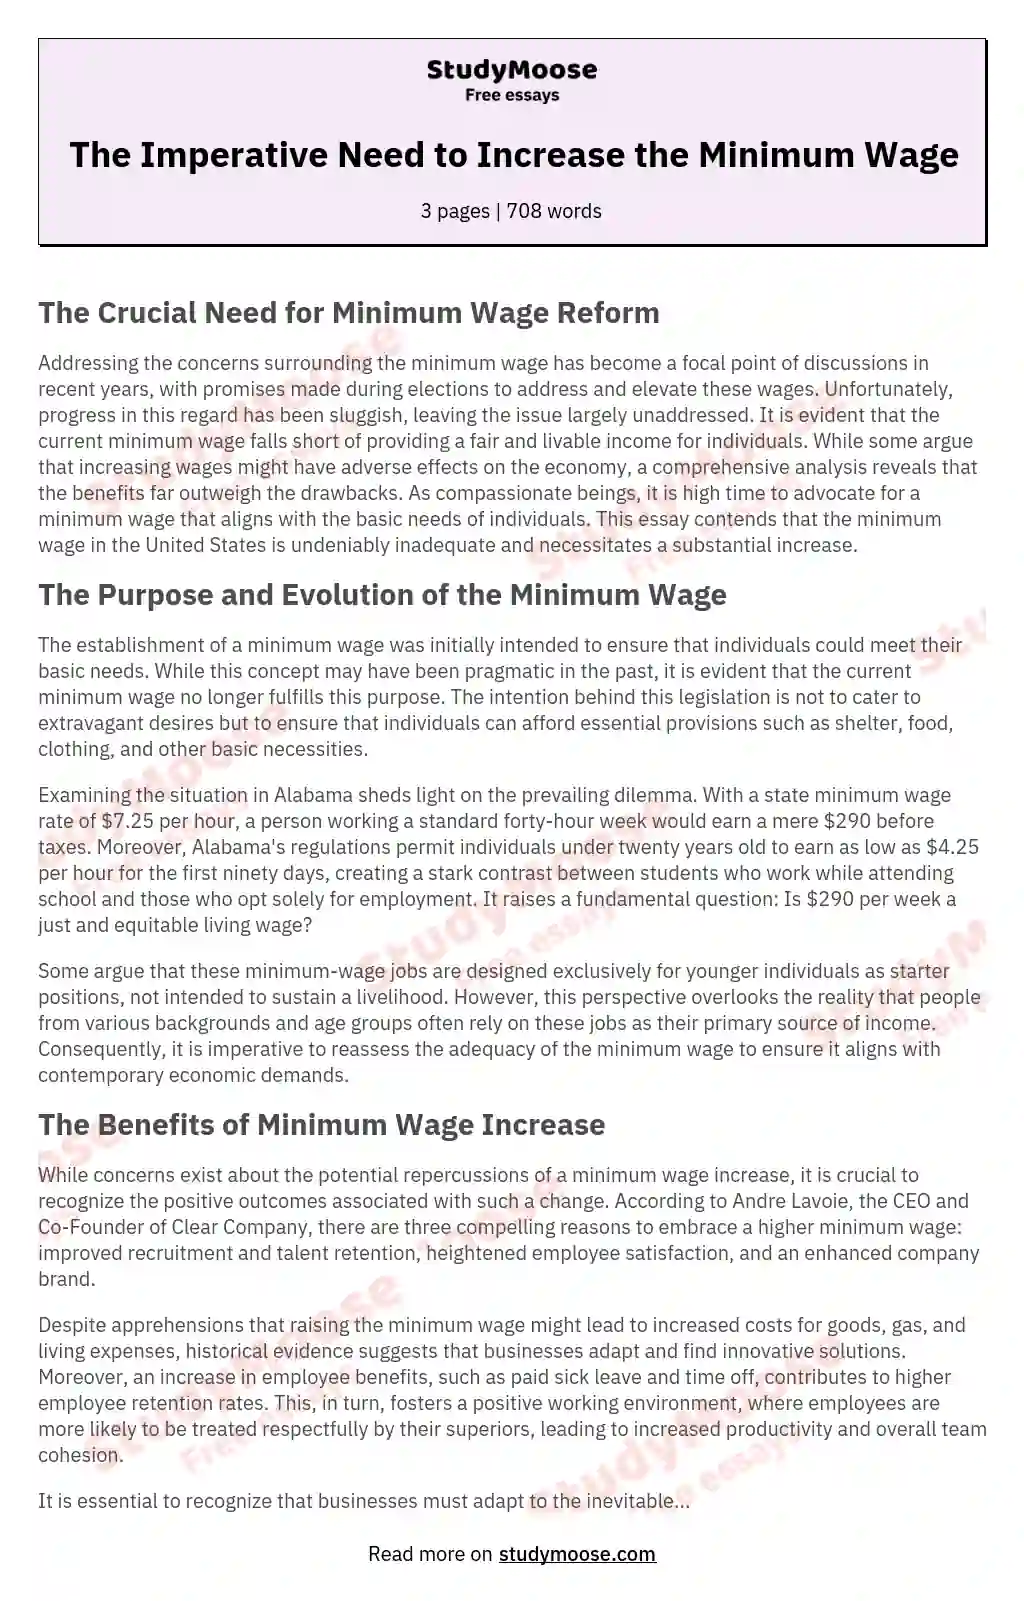 The Imperative Need to Increase the Minimum Wage essay